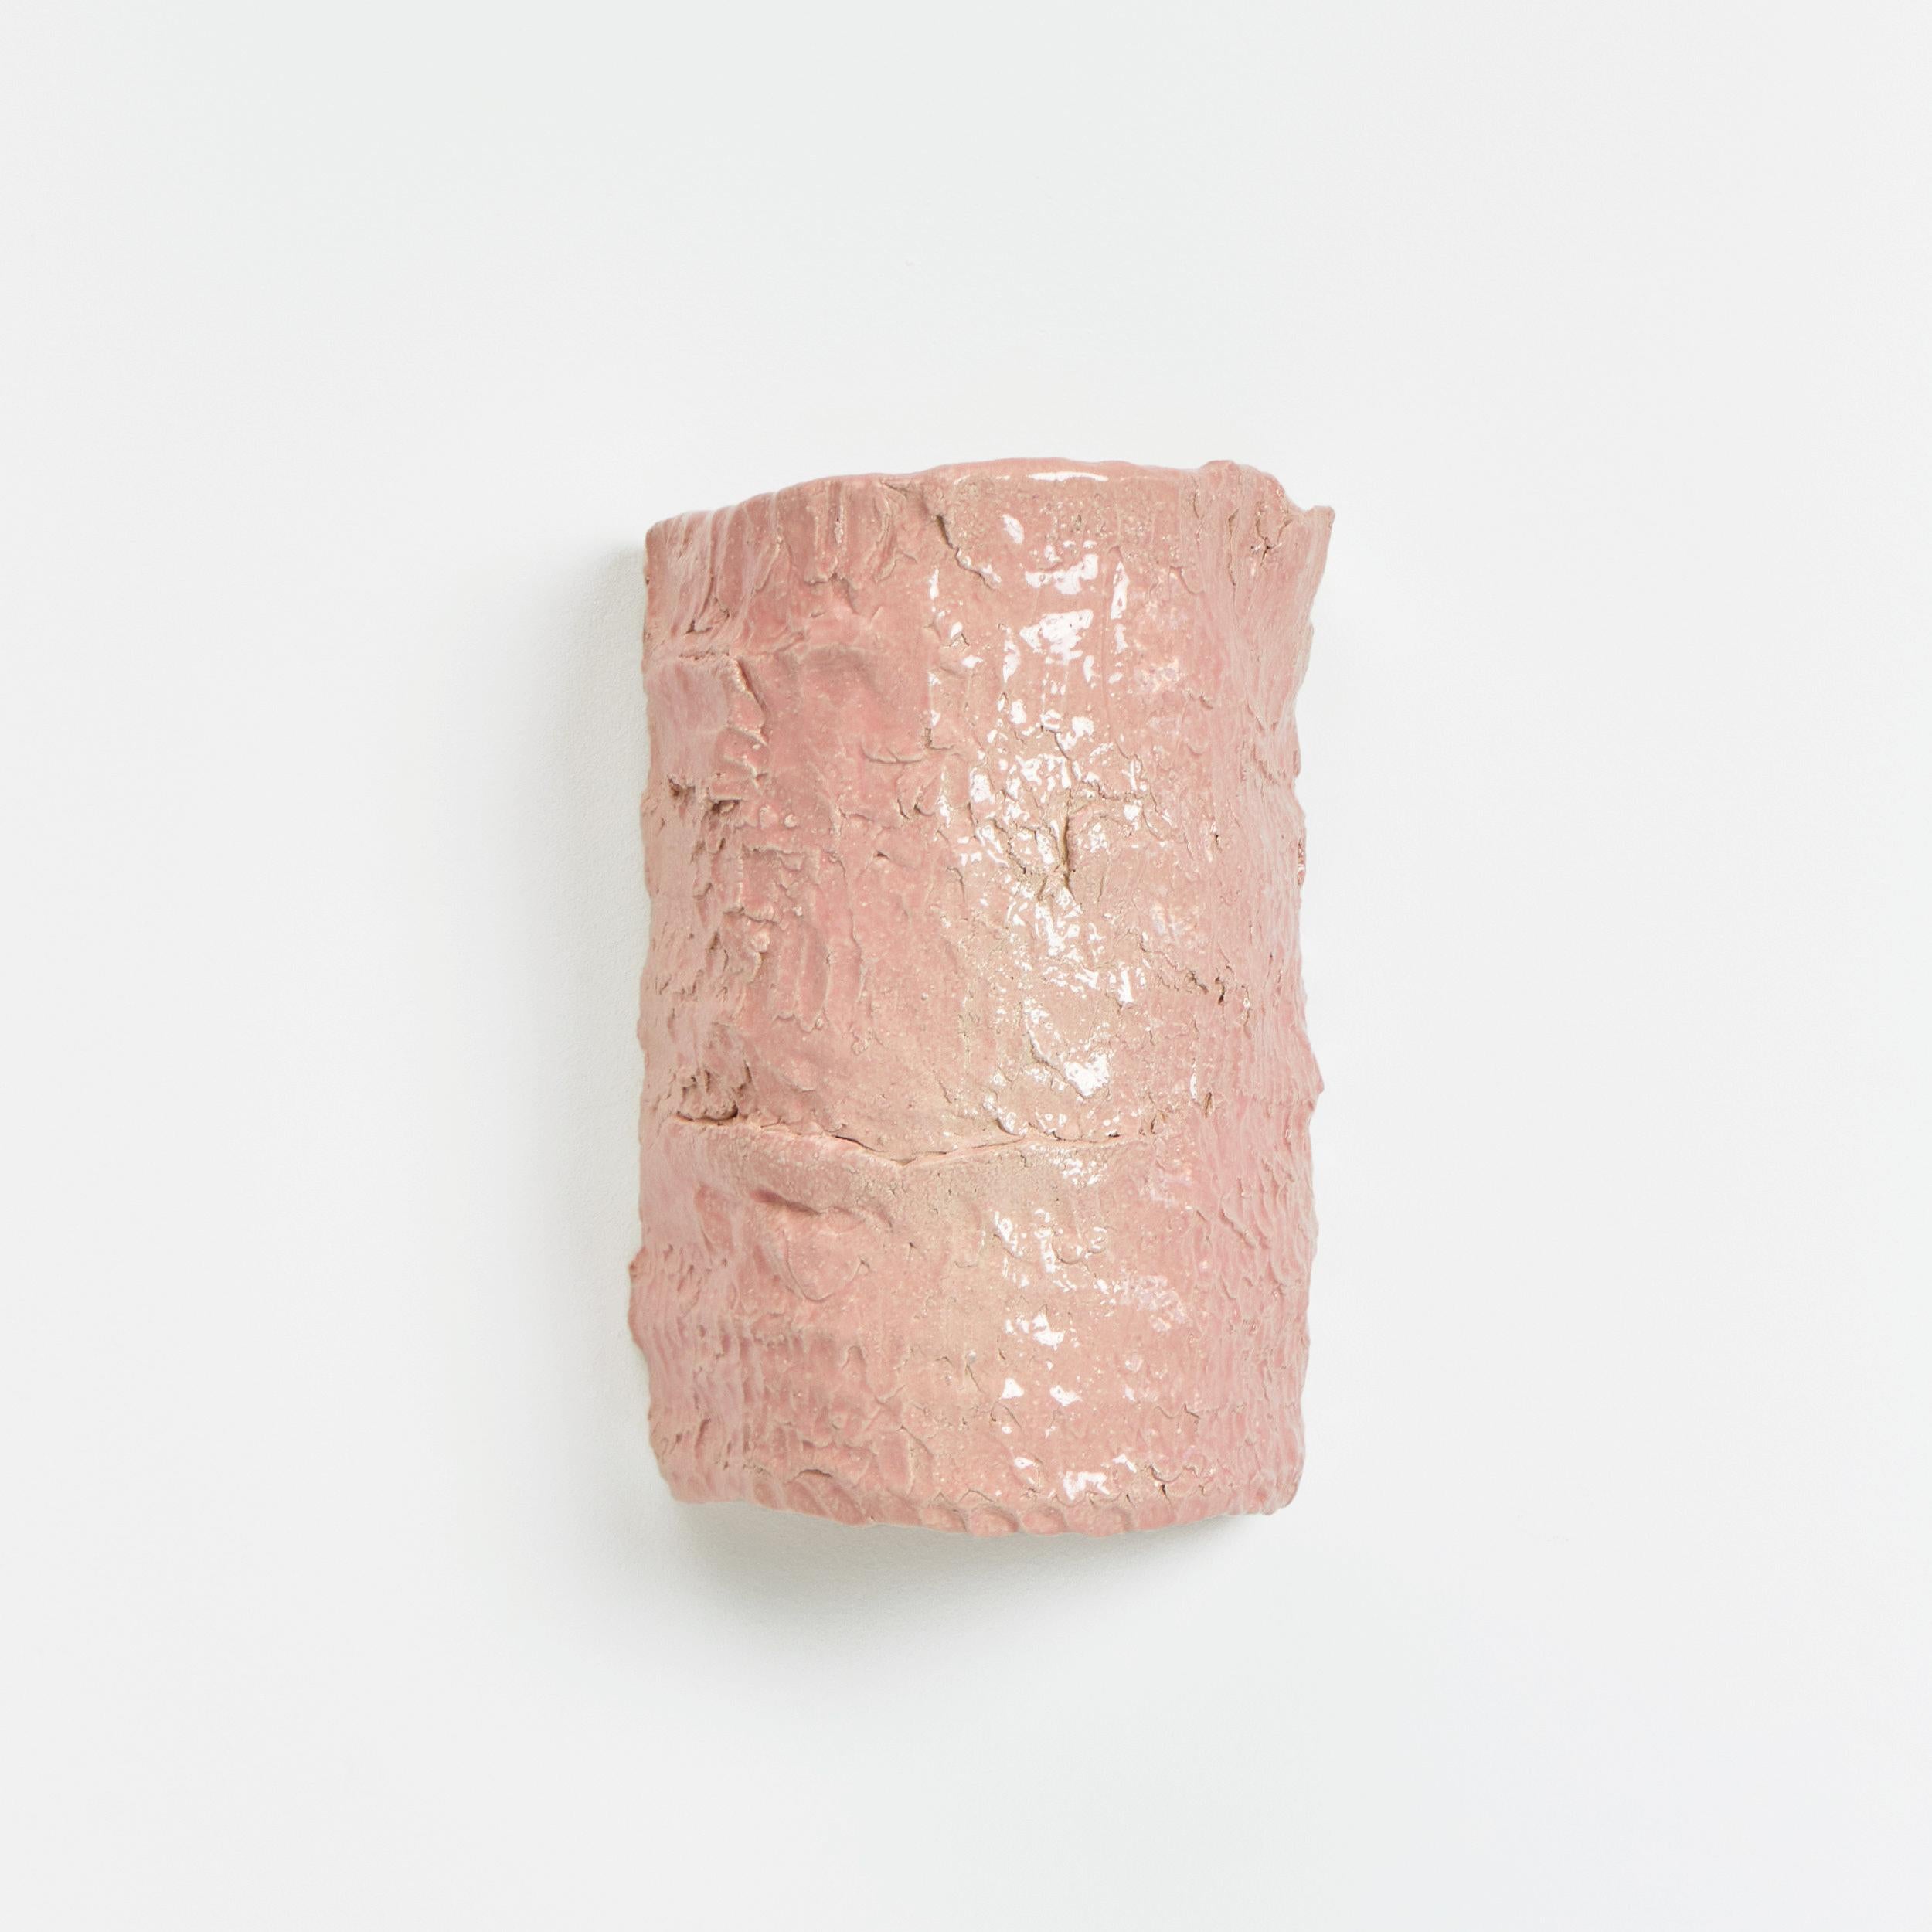 Casa Wall Light No 2 in sorbet pink
Designed by Project 213A in 2023

Artisanal ceramic light with textured finish, made in Project 213A's own ceramic workshop.
Each piece is unique due to its handmade nature, shapes and shades vary